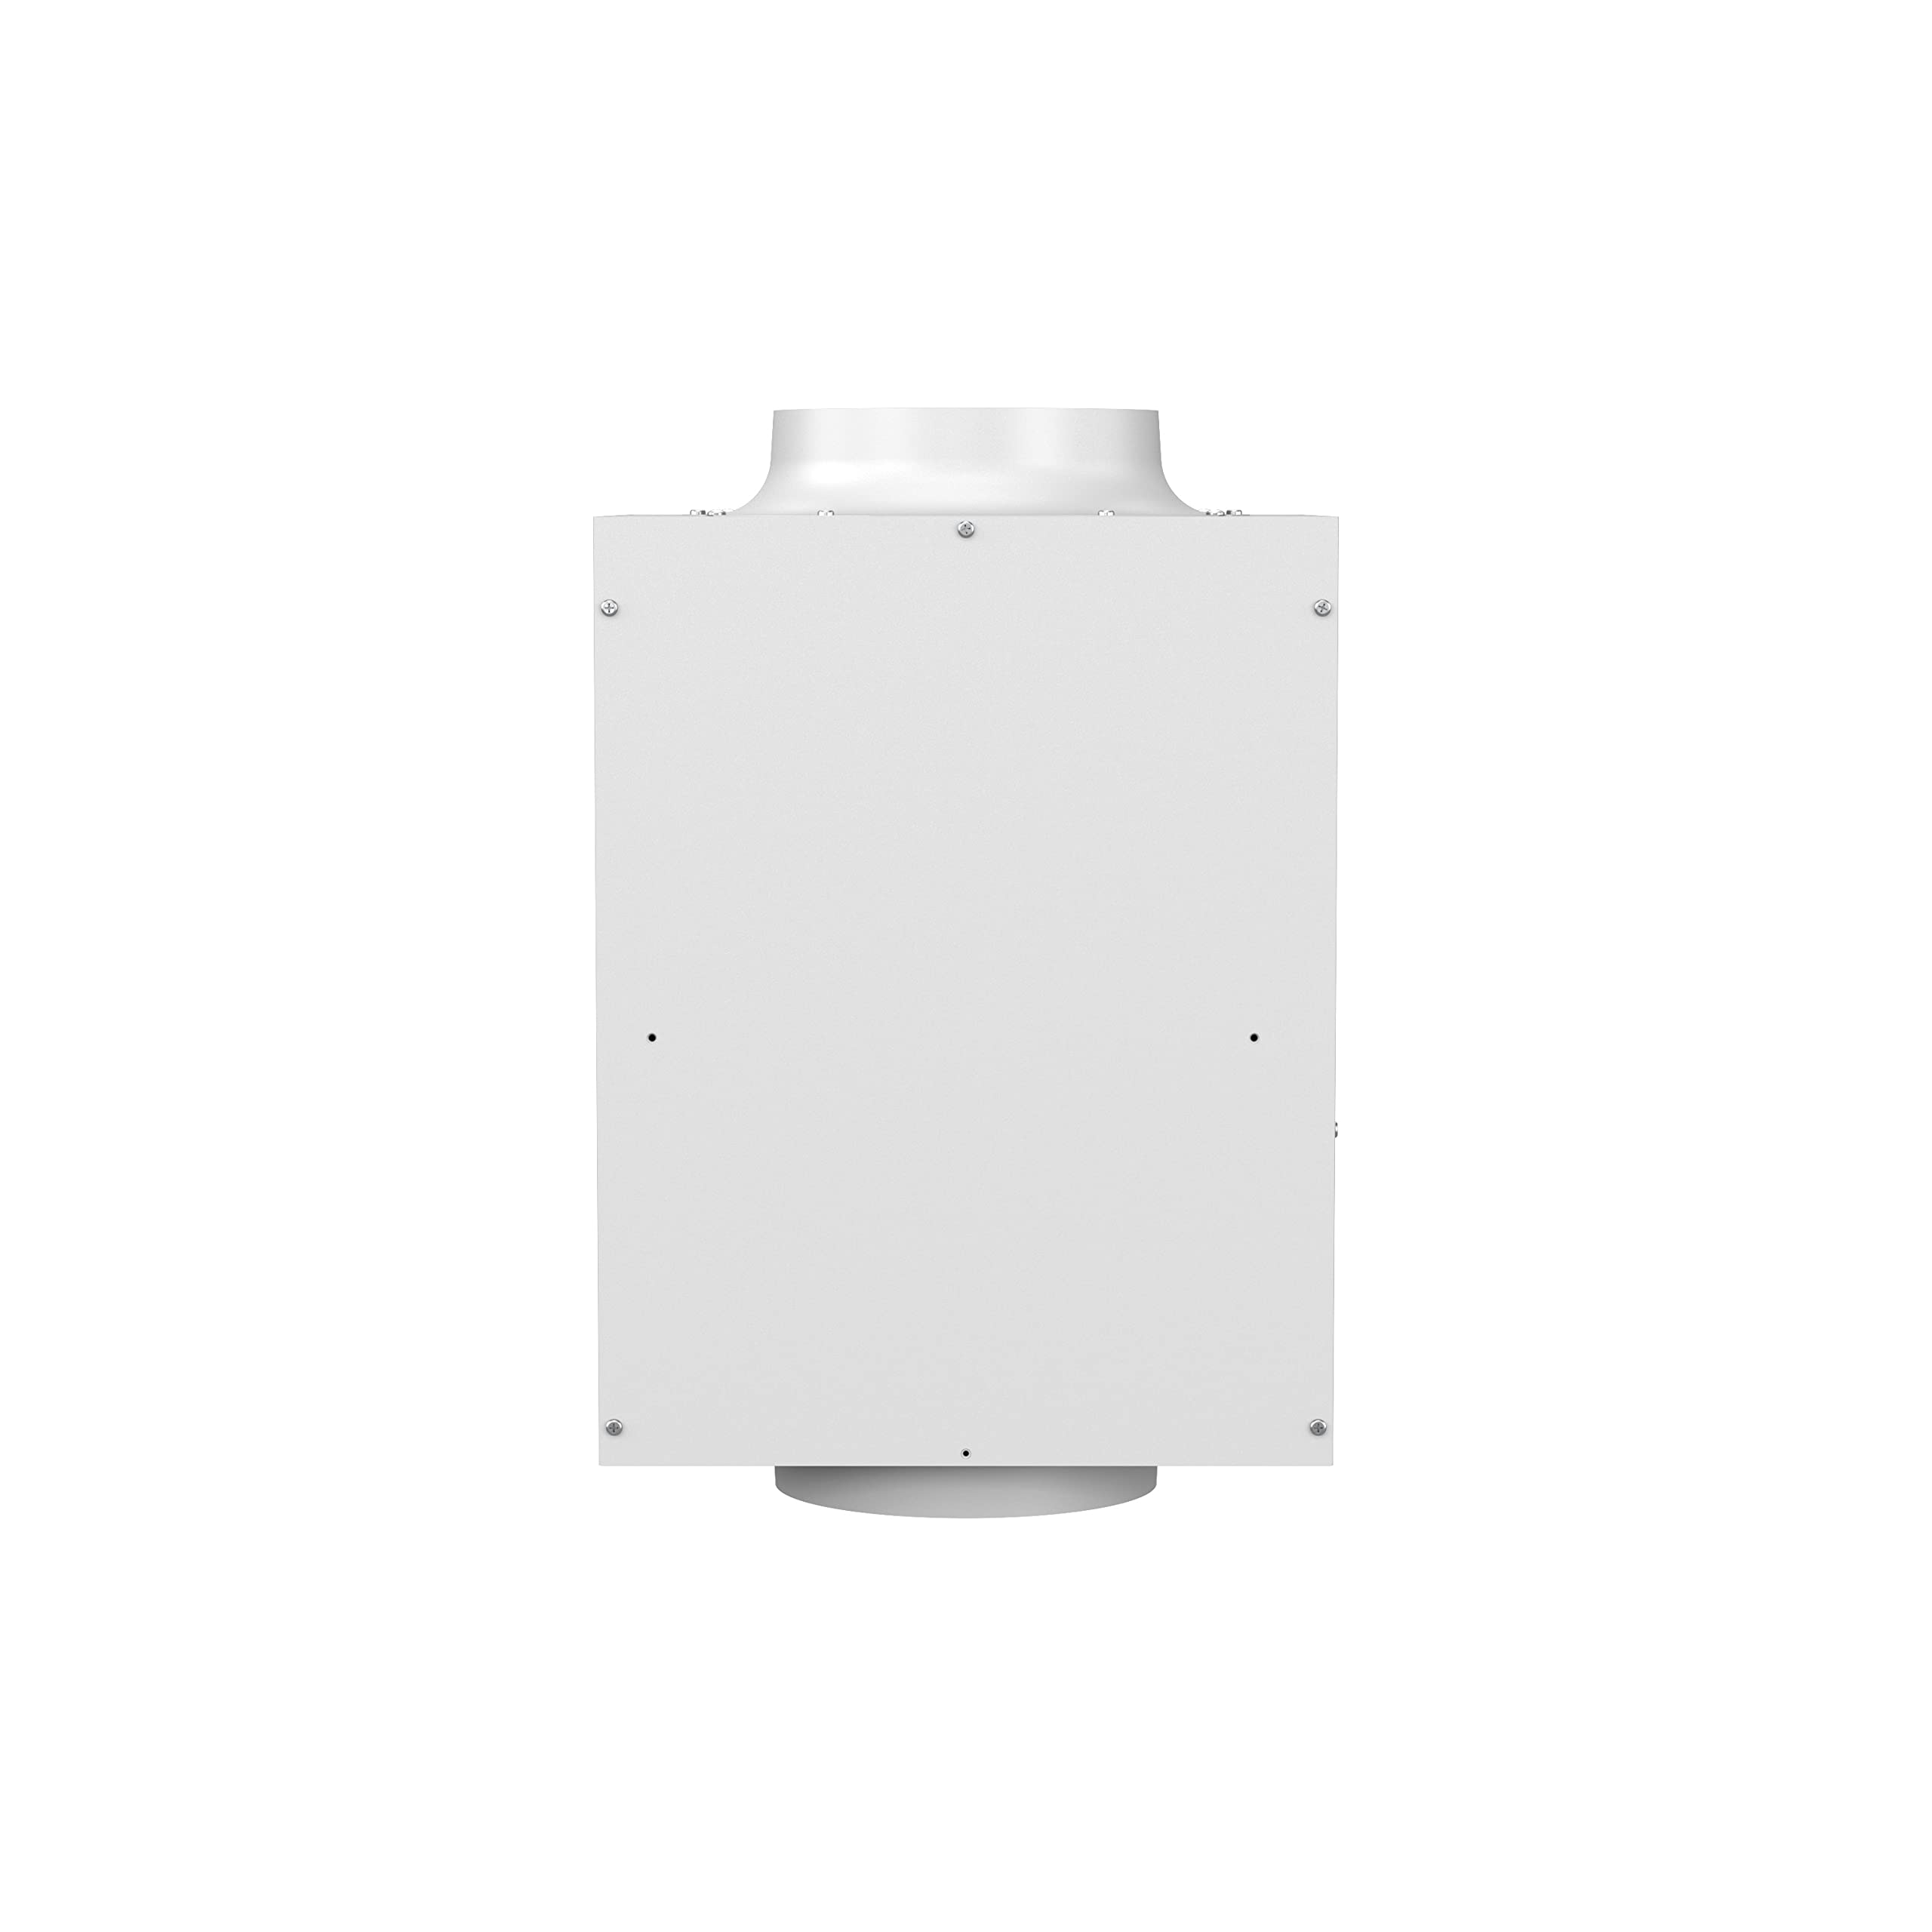 AprilAire 300 Self-Contained Fan Powered Whole House Humidifier, for Homes with Ducted Forced Air Furnace Systems, Boilers, Mini-Splits, Radiant Heat, and Other Ductless Systems up to 3,900 Sq. Ft.